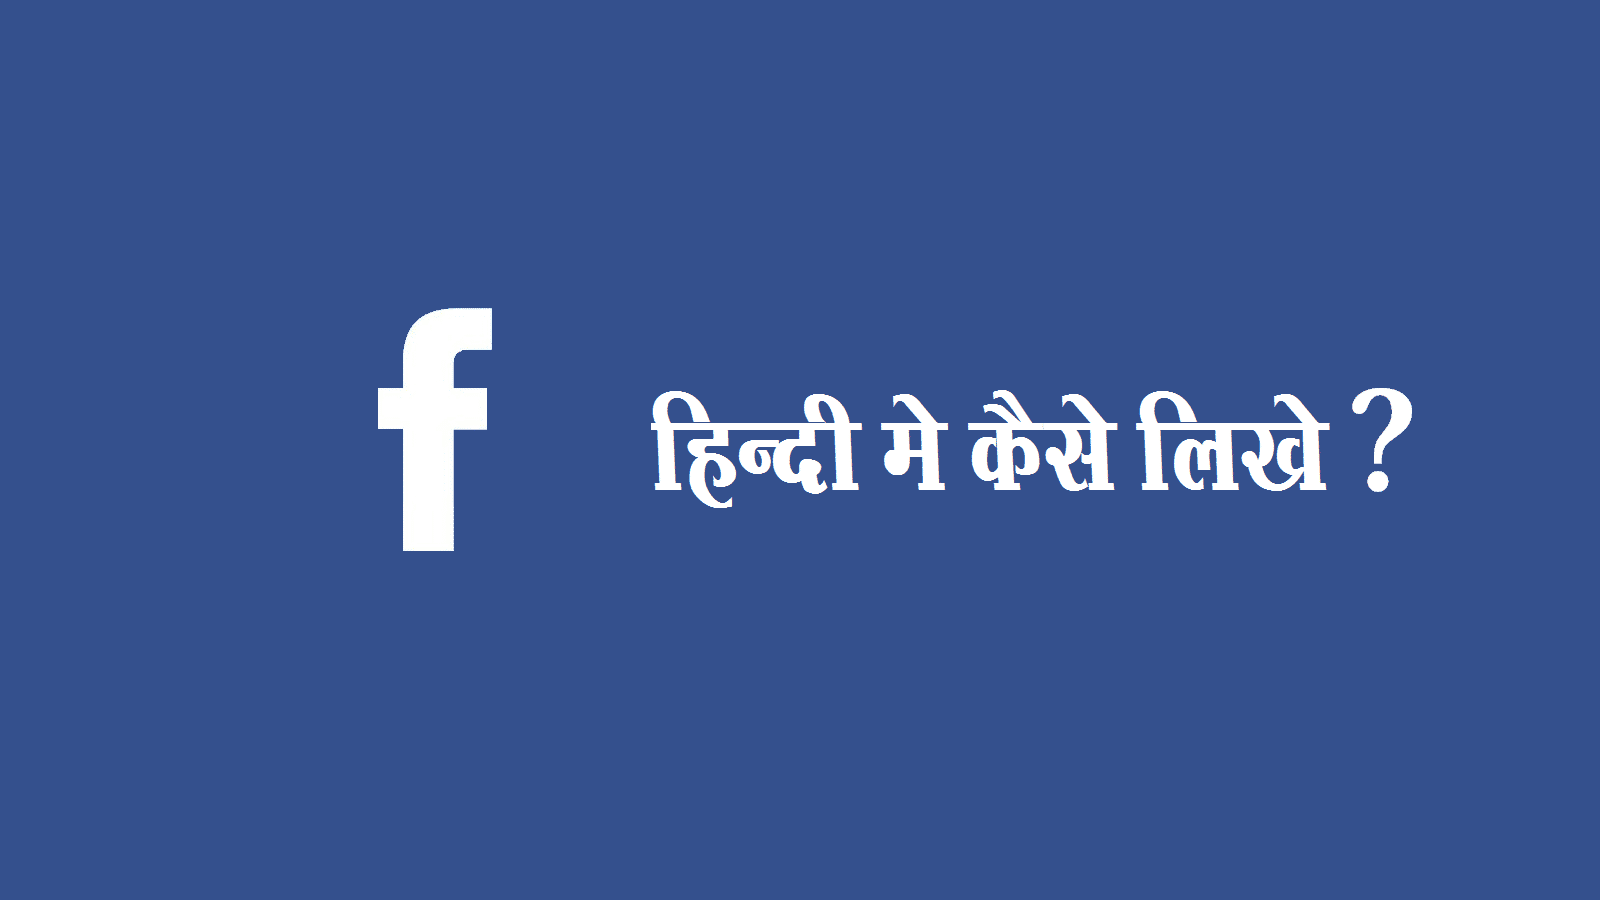 How to Write, Post or Comment on Facebook in Hindi